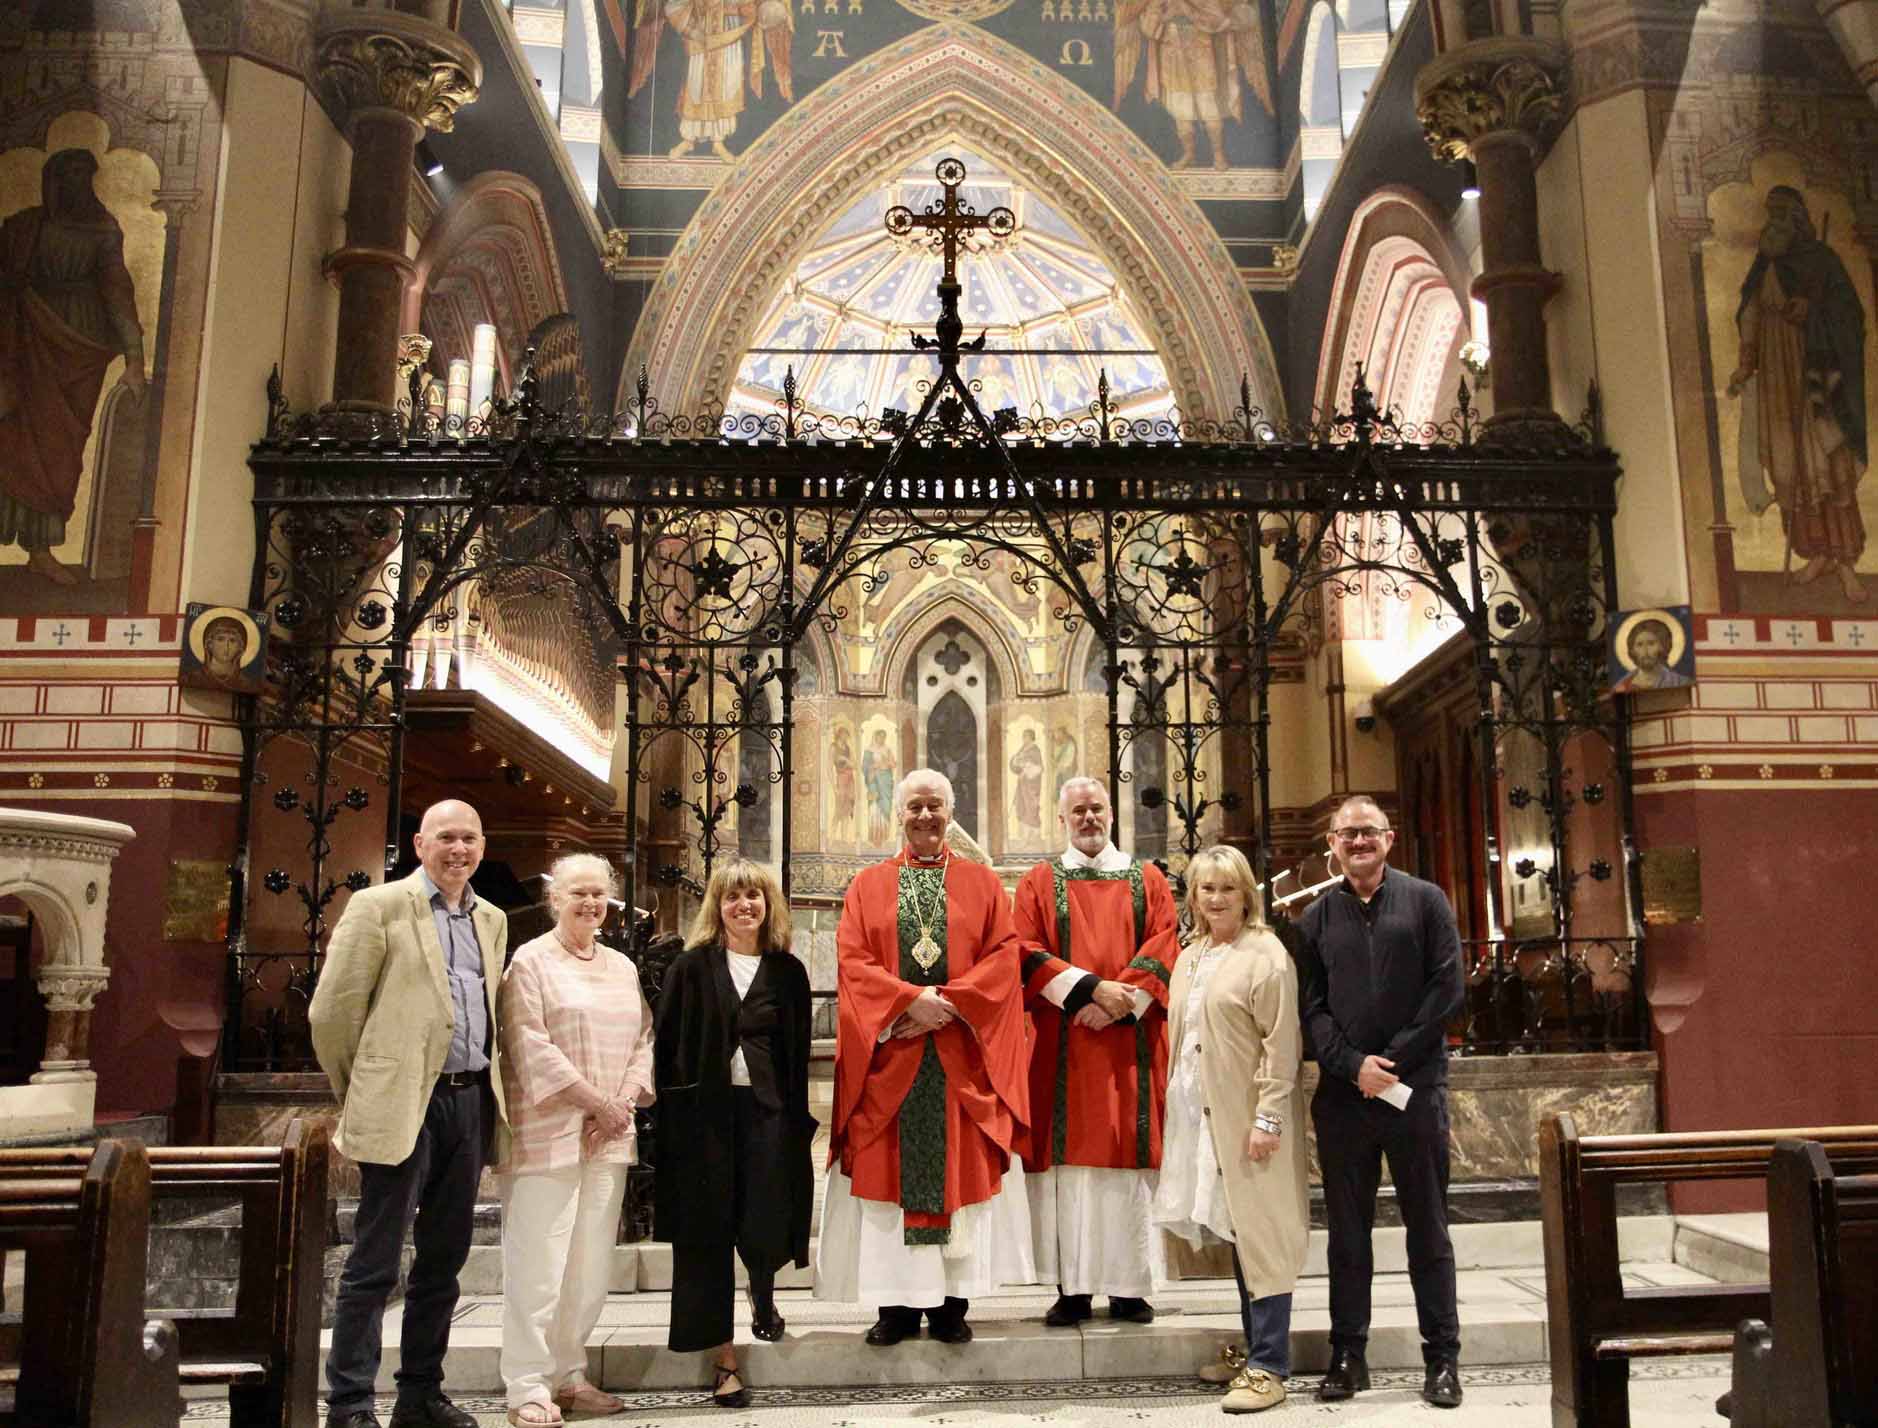 James Howley (architect), Barbara Bergin (St Bartholomew's), Sylvia Mambriani (working architect), Archbishop Michael Jackson, Canon Andrew McCroskery and Abigail and Kerry O'Brien, at St Bartholomew's Patronal Festival and Service of Thanksgiving for the restoration works to the church.